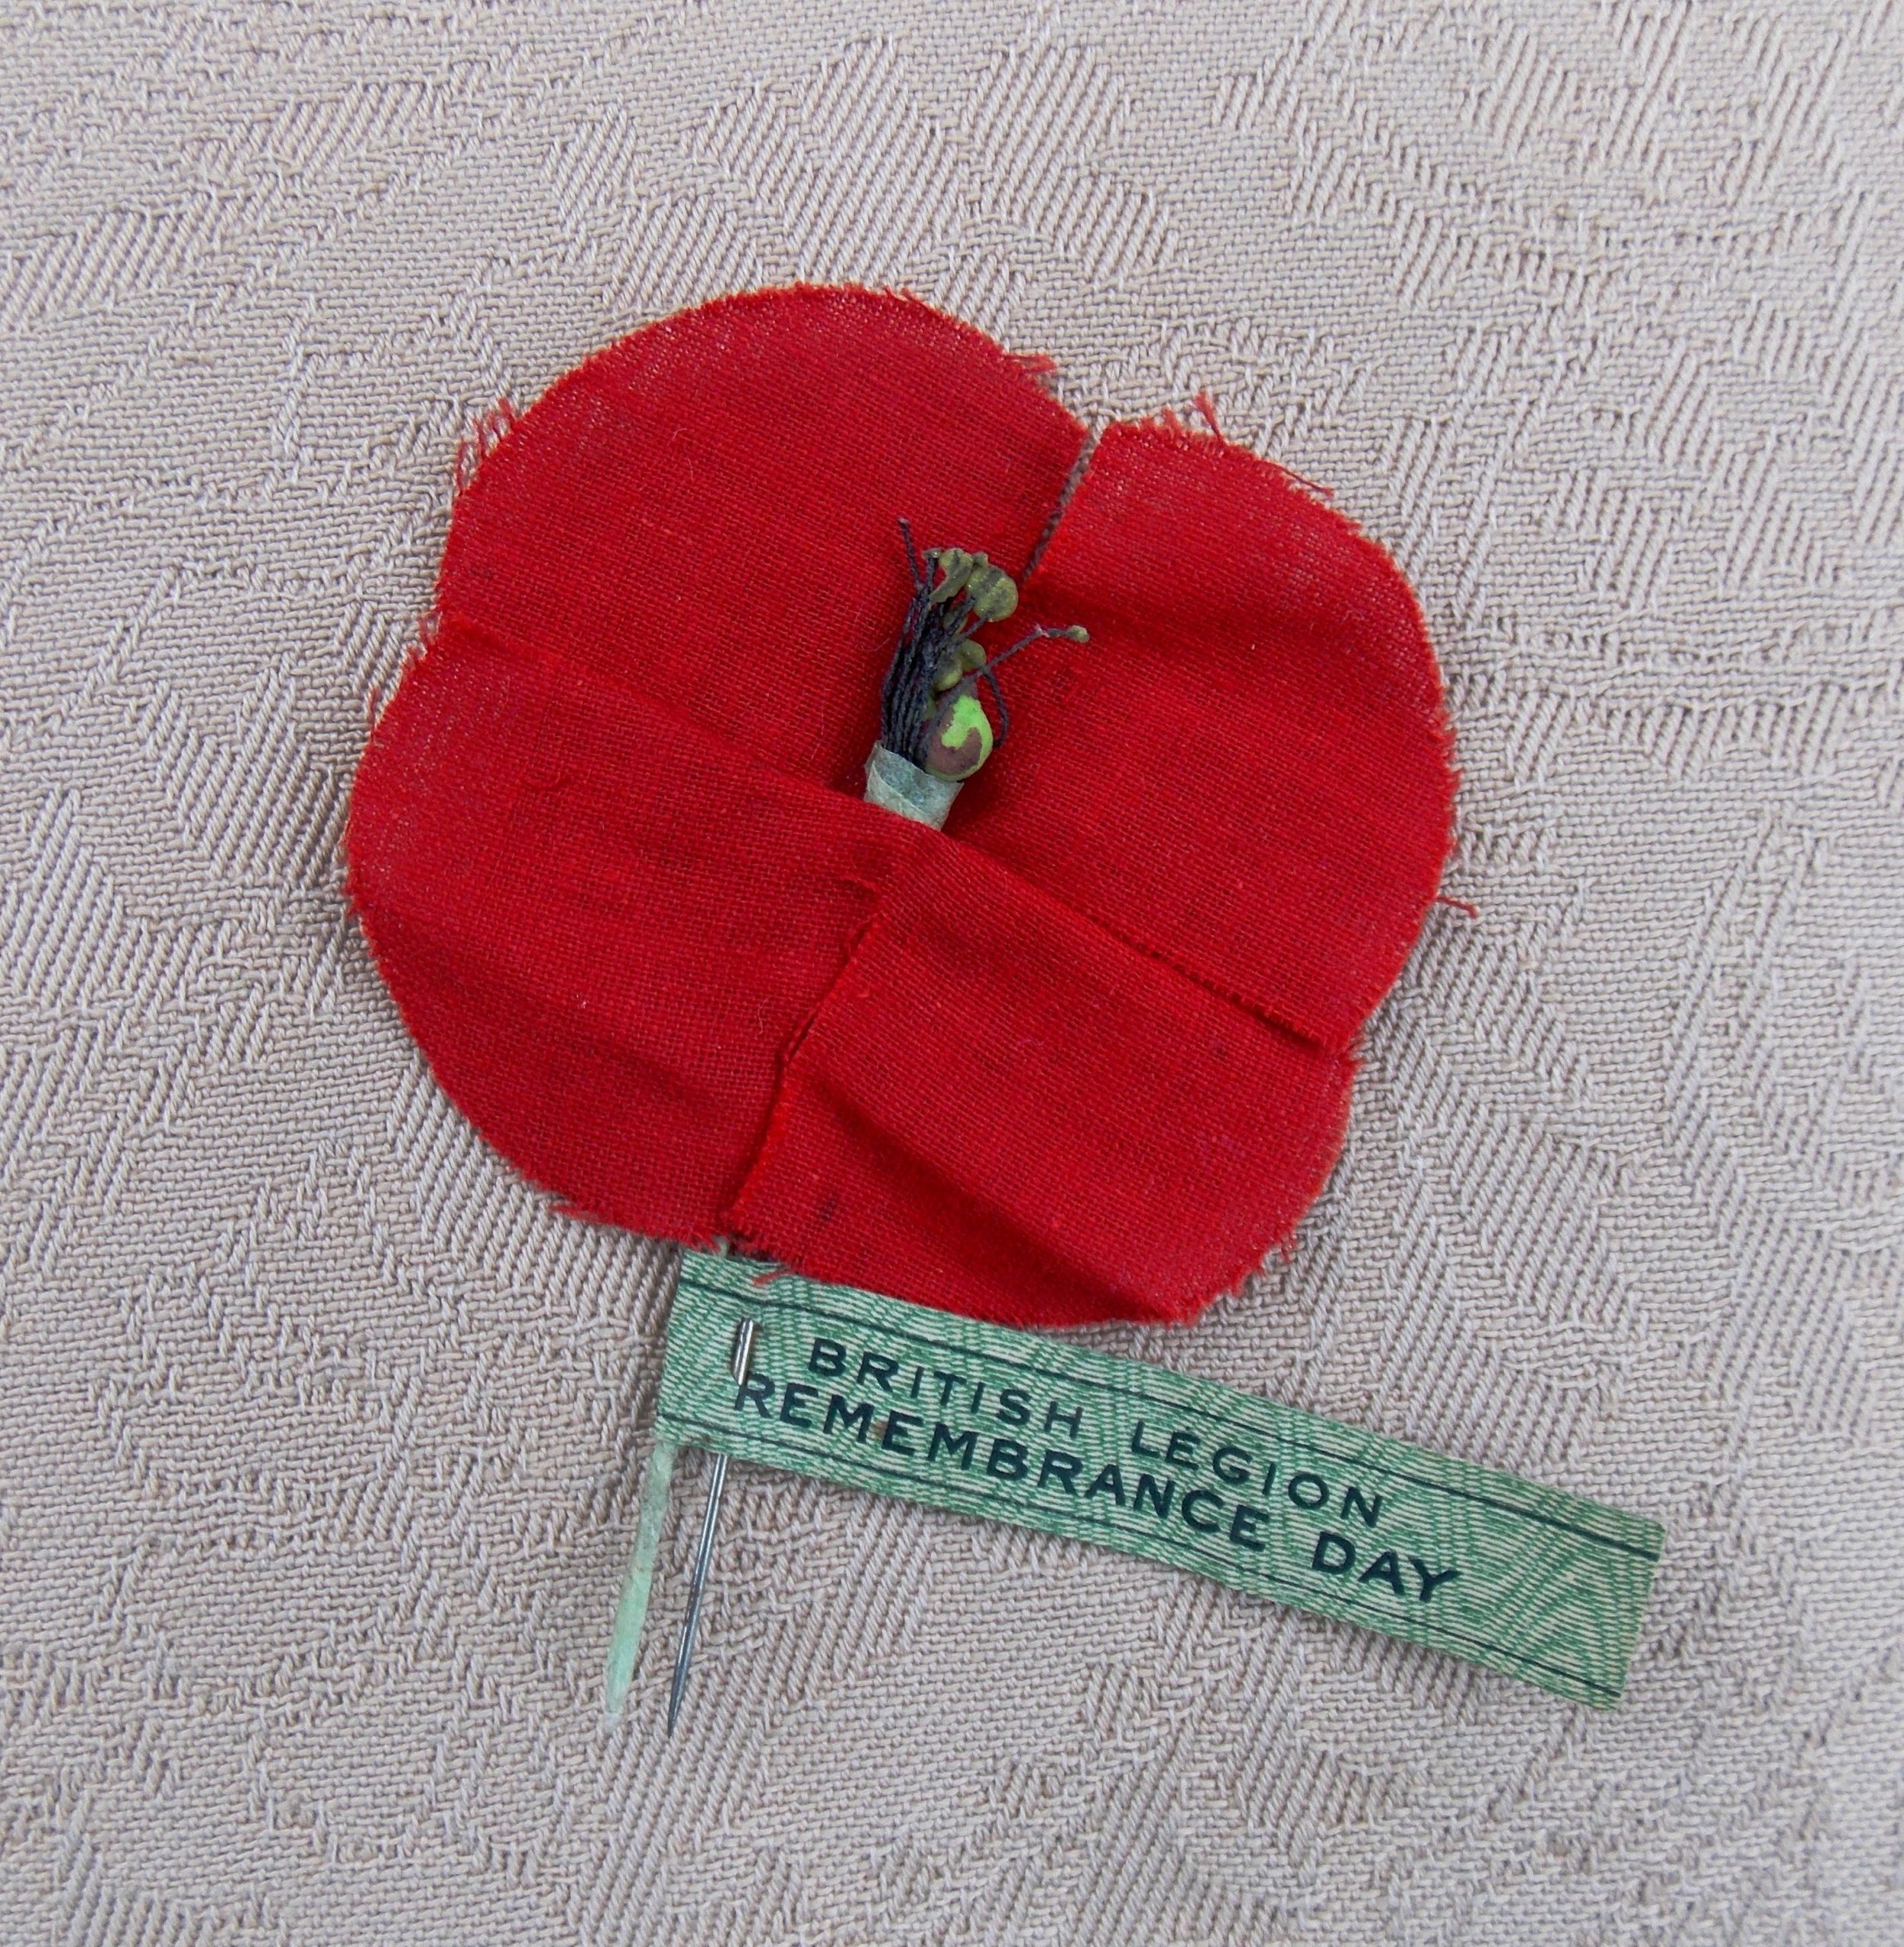 Photo of a hand sewn red poppy with the words 'British Legion Remembrance Day' on the stem.